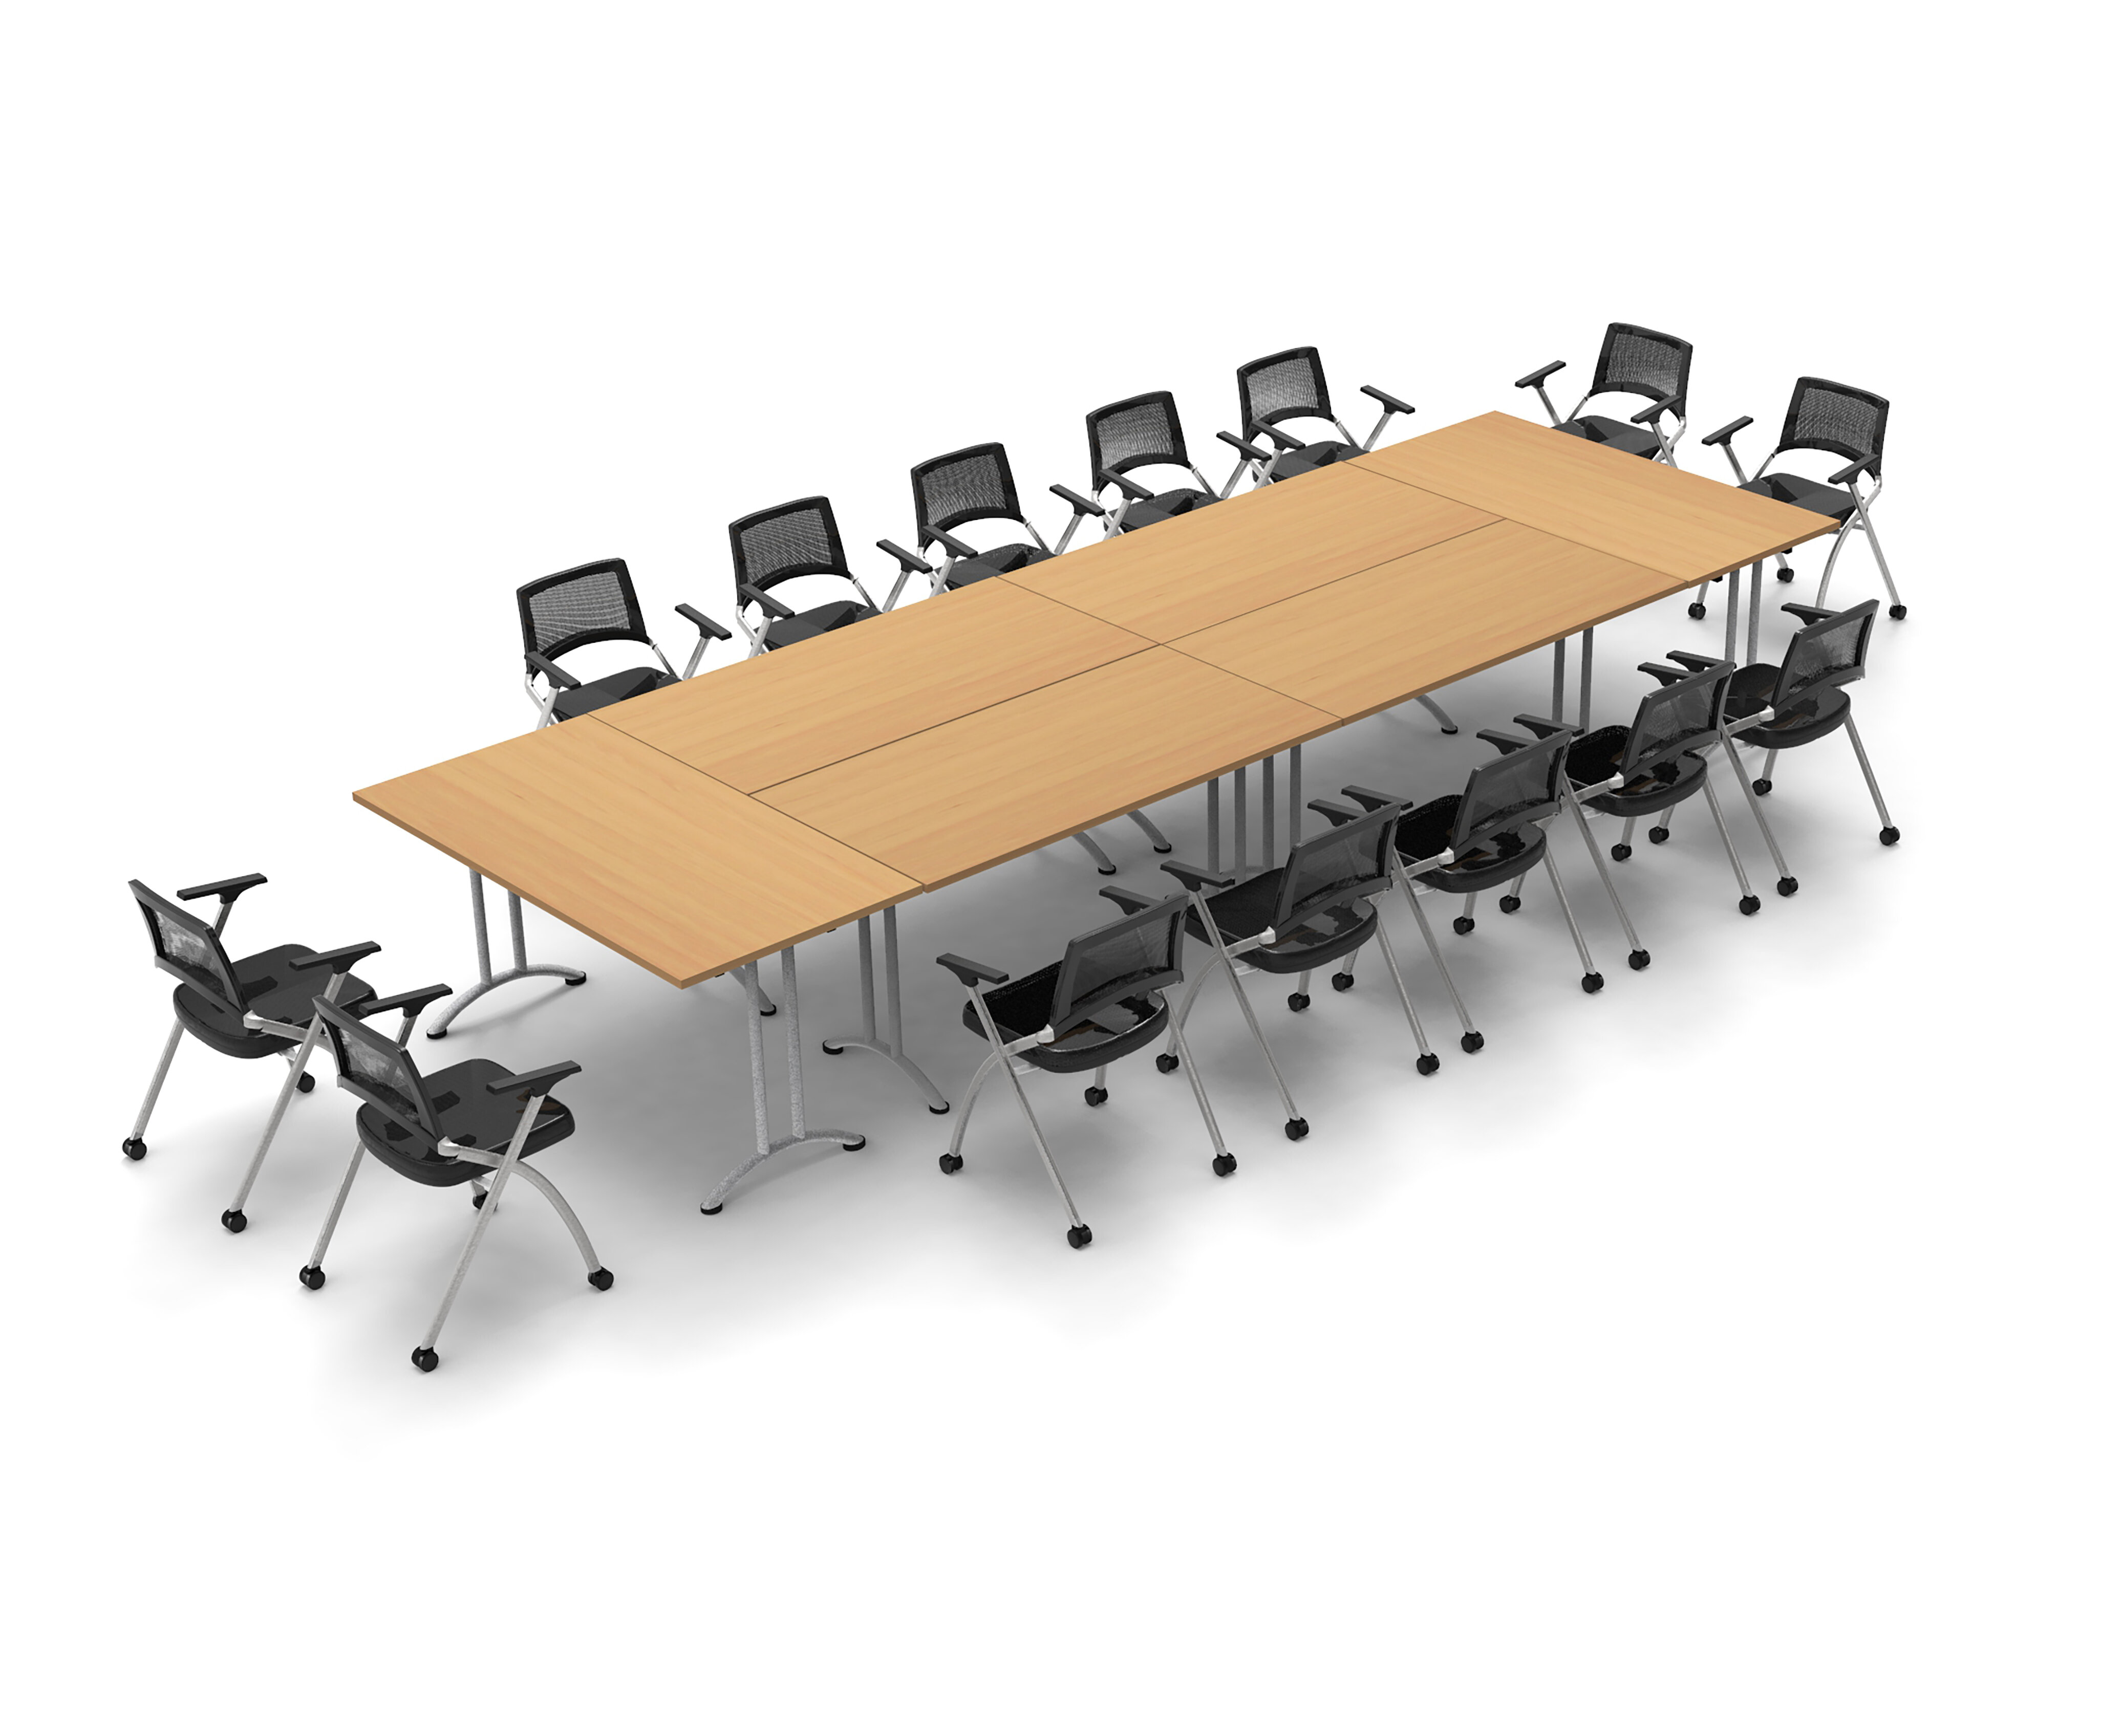 . Chairs NOT Included 14 Person Conference Tables Meeting Seminar 6 Tables Maximize Collaboration Model 6391 6 pc Group Color Java Commercial Grade Ready to Unfold and Use 